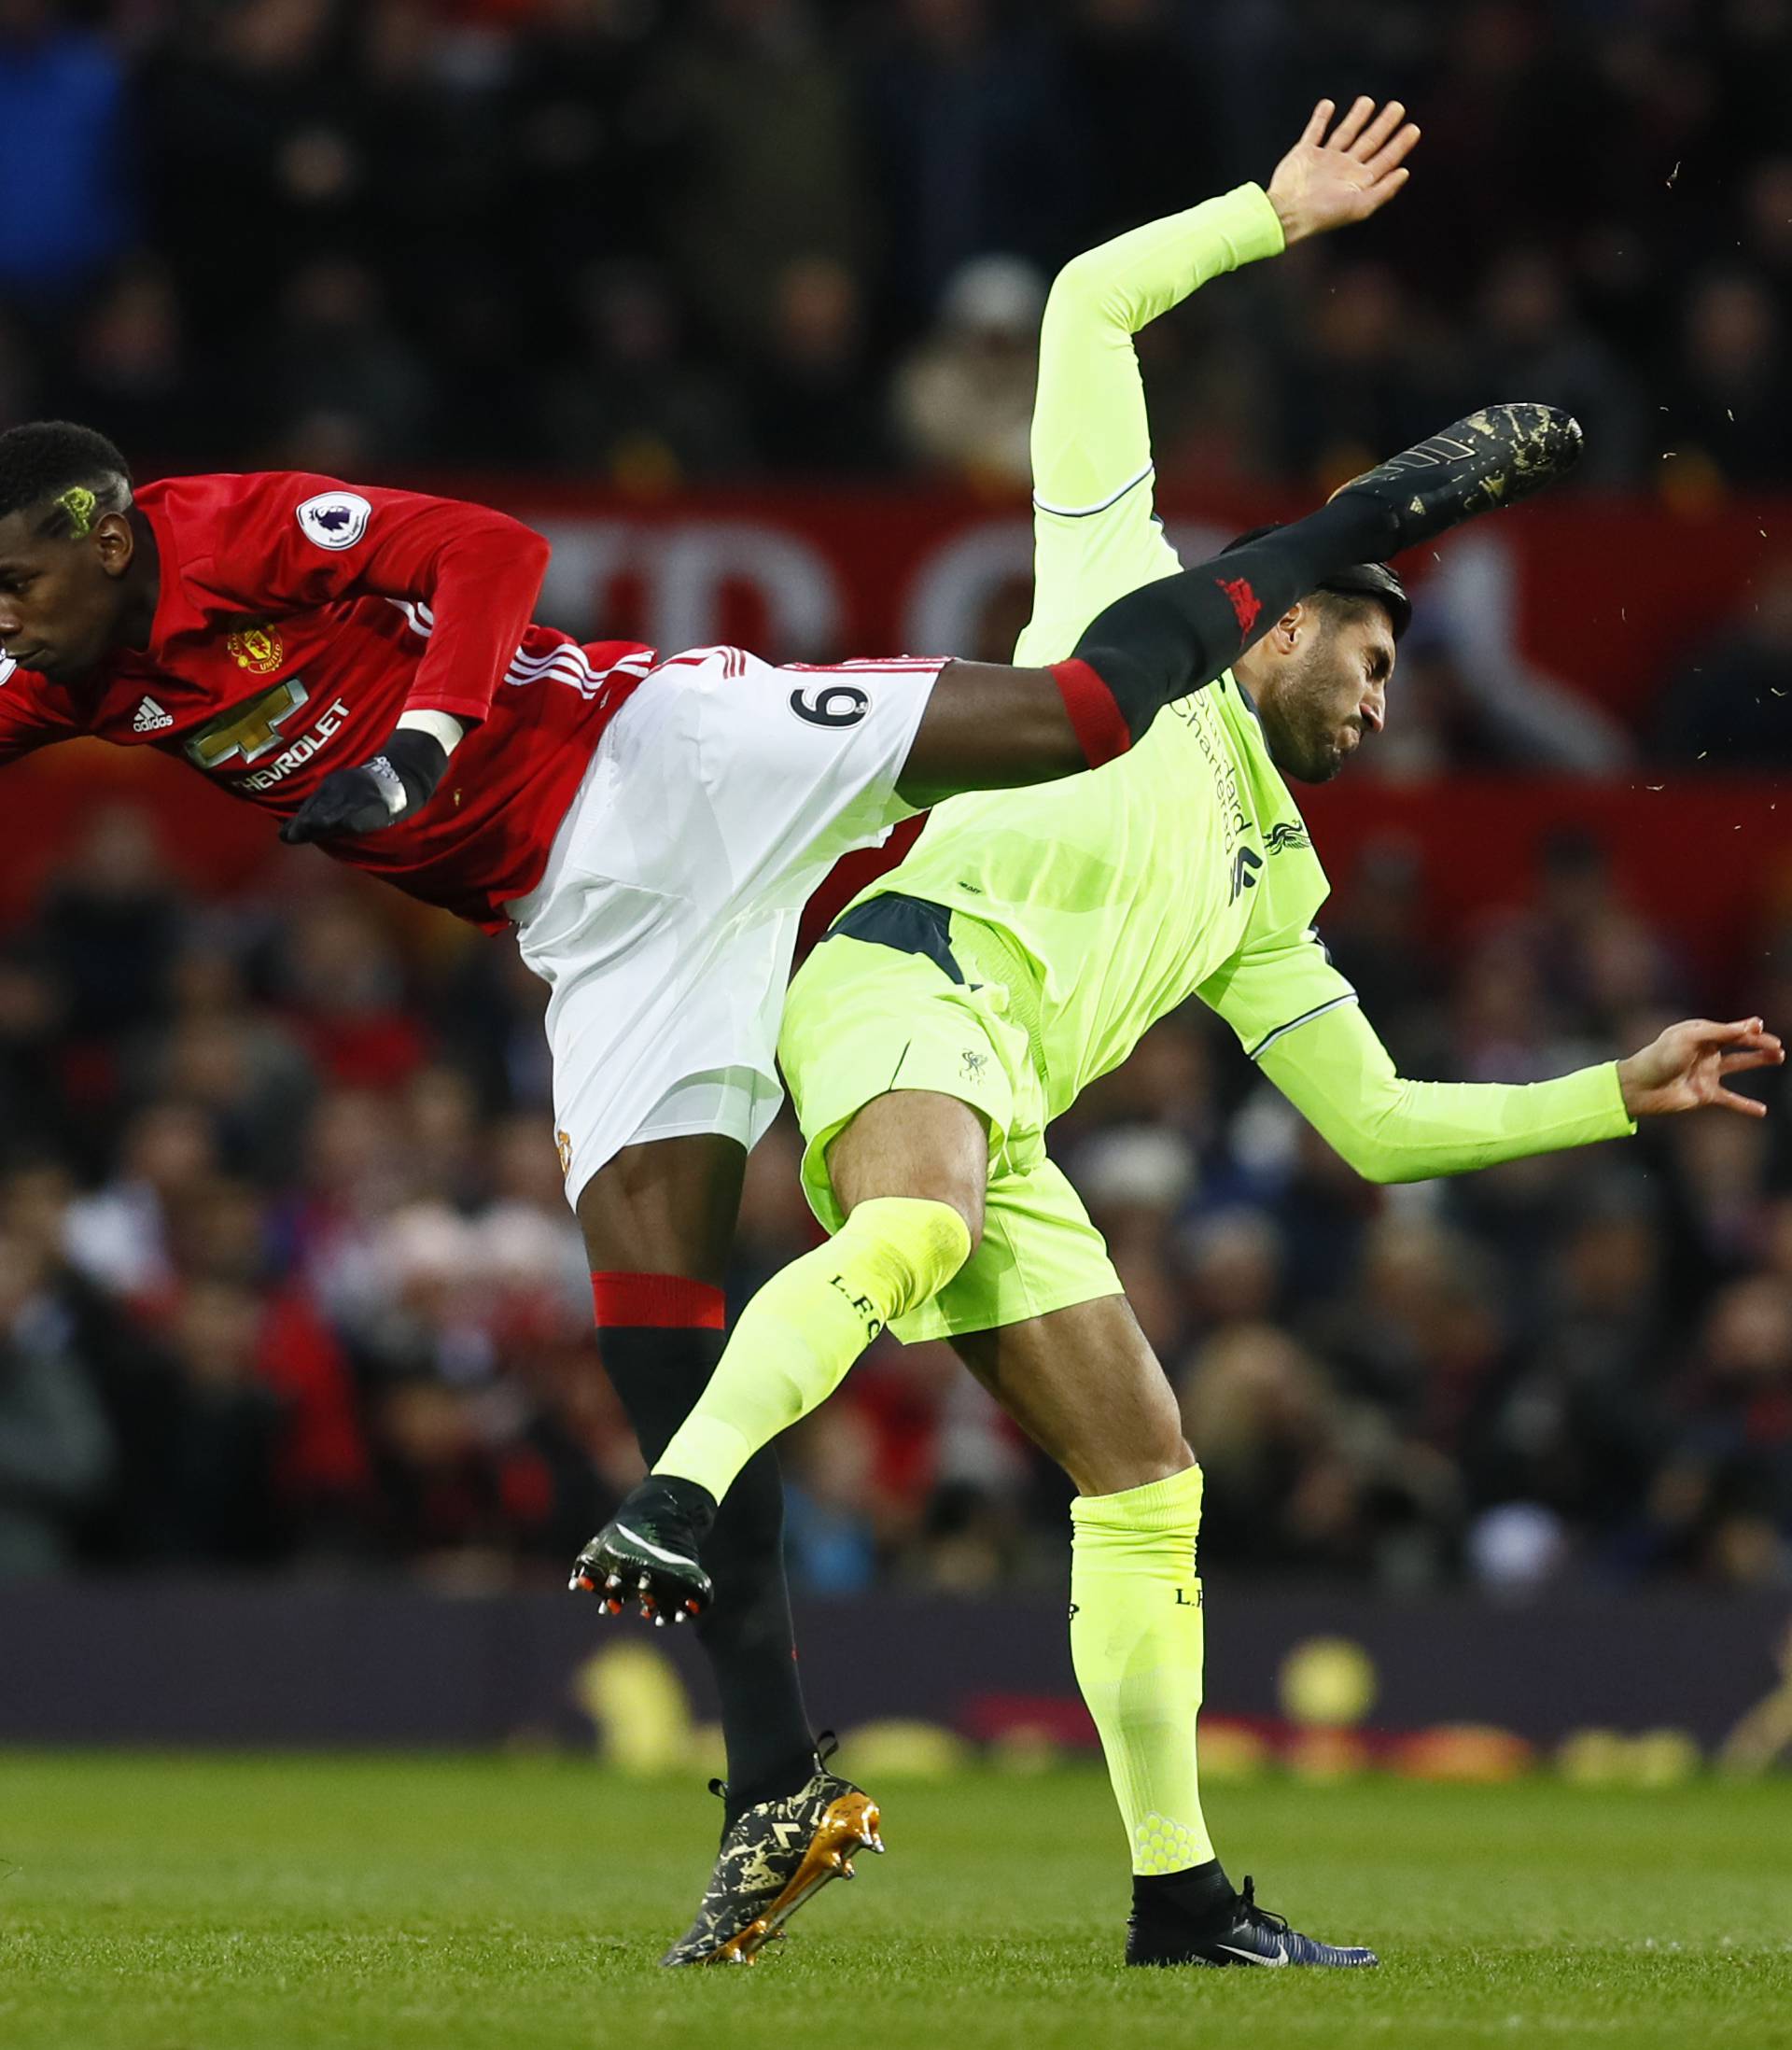 Manchester United's Paul Pogba in action with Liverpool's Emre Can